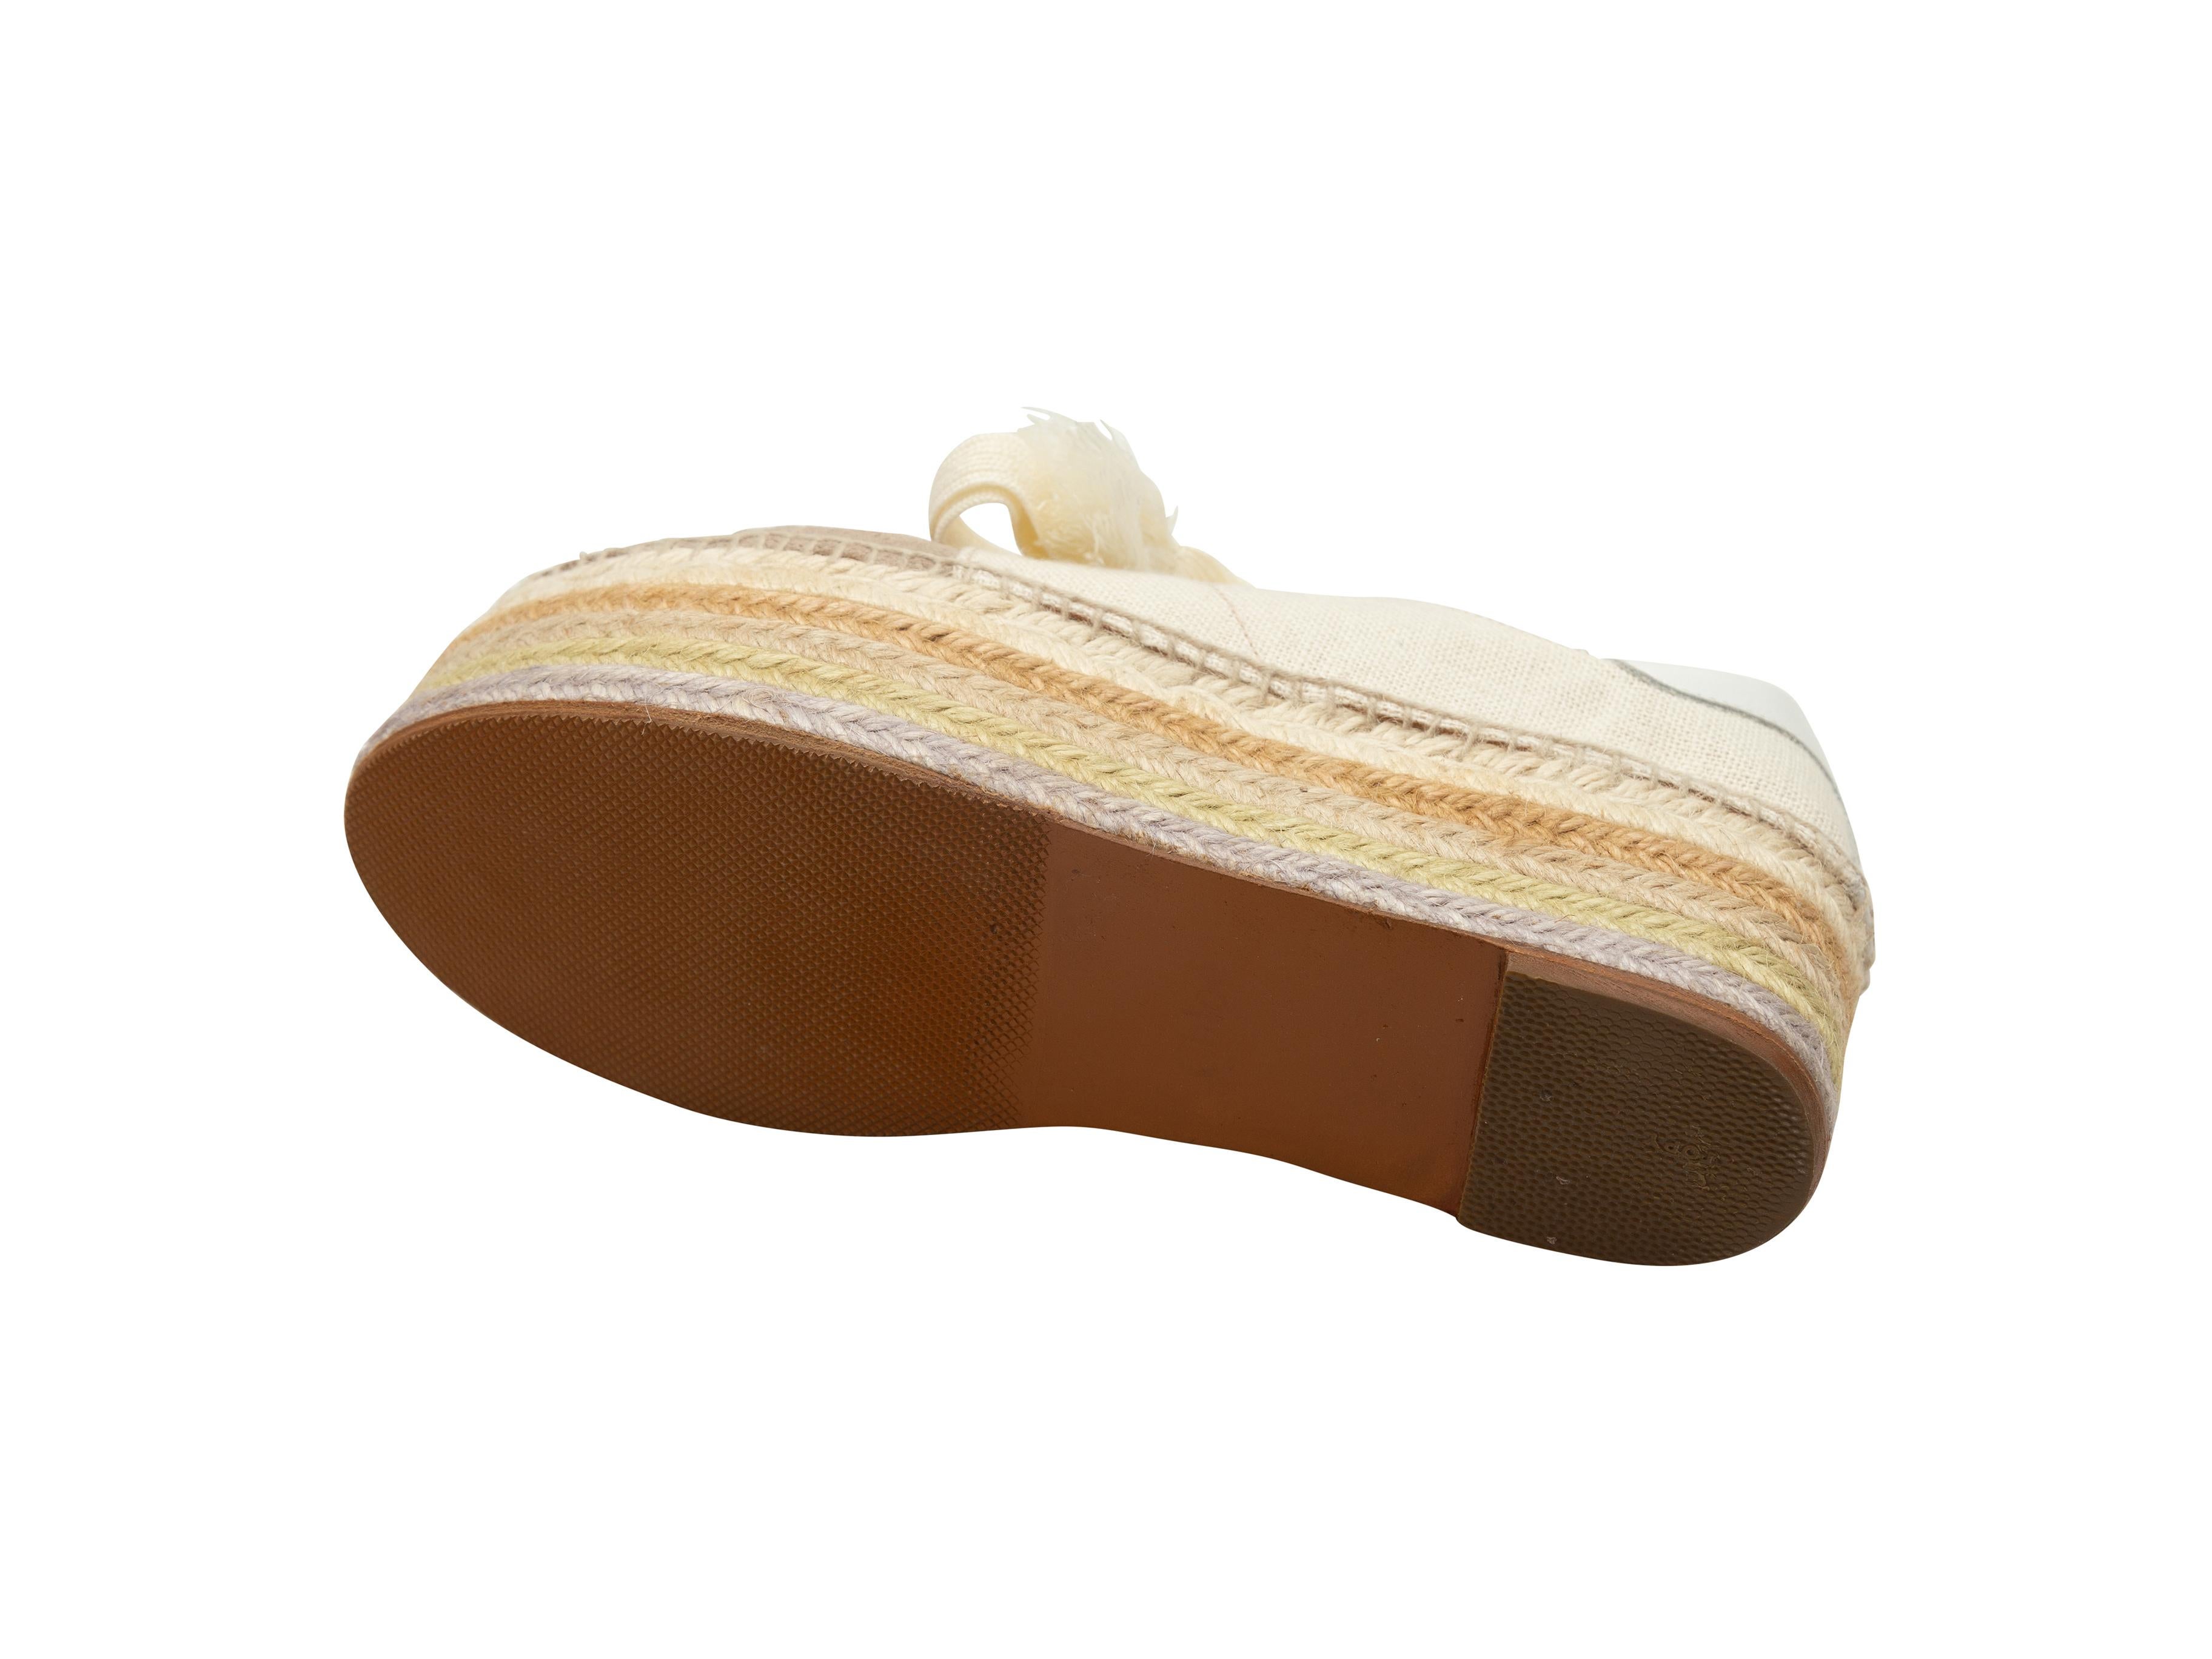 Product details: Beige and taupe jute and suede flatform espadrilles by Chloe. Jute trim at rubber soles. Lace-up tie closures at tops. Designer size 41. 2.5